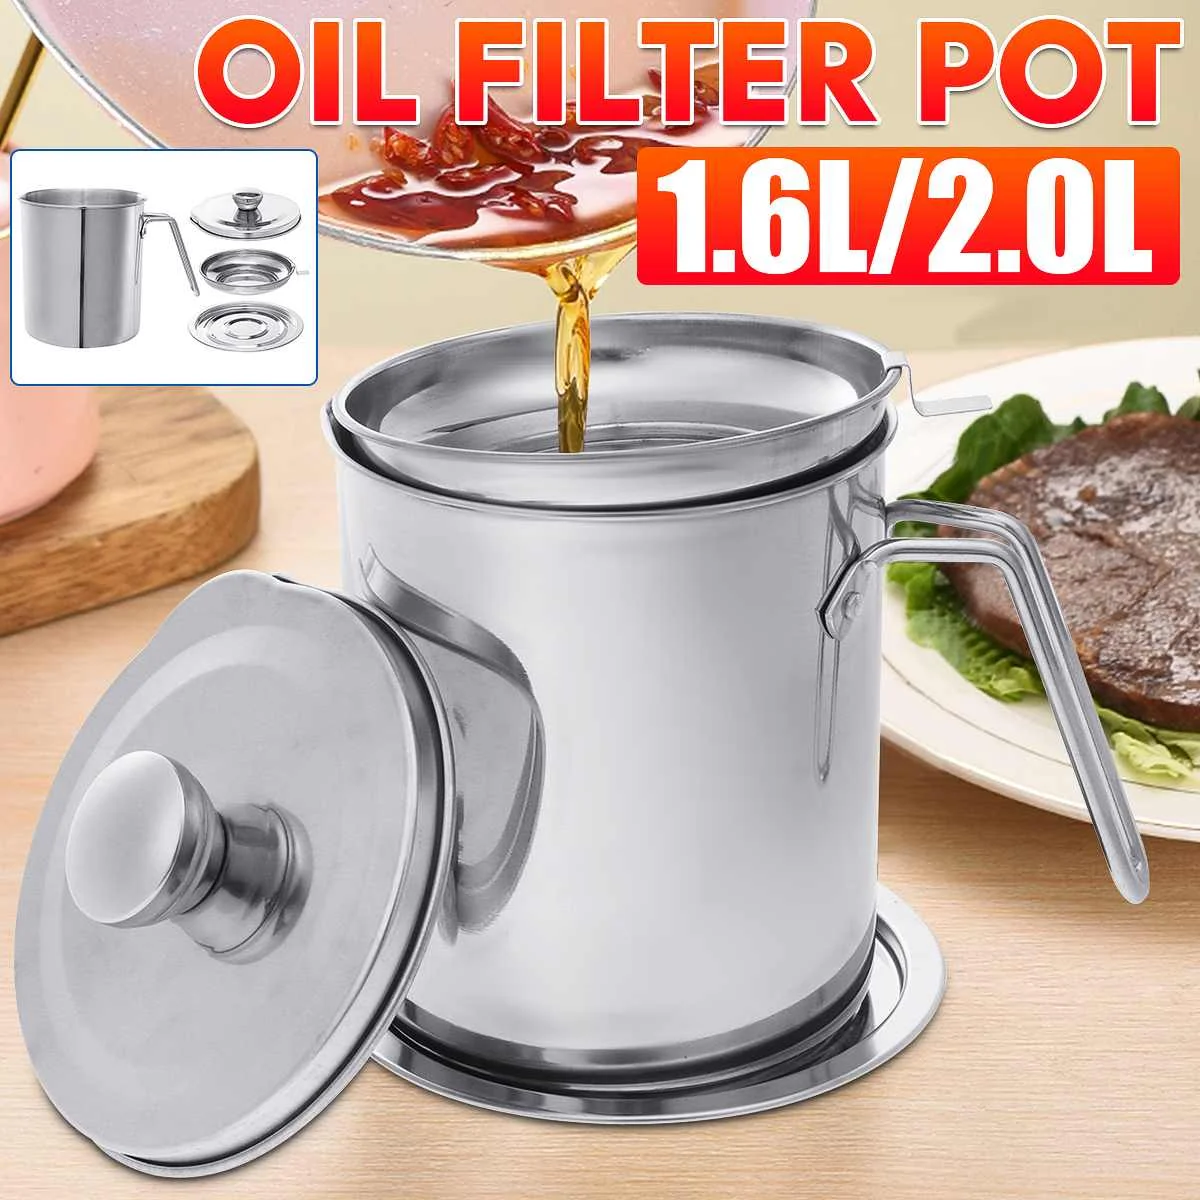 https://ae01.alicdn.com/kf/S281a1320224a405a9931f1f4861e494bH/1-6L-2L-Stainless-Steel-Oil-Filter-Bacon-Grease-Strainer-Tank-Container-Jug-Large-Capacity-Storage.jpg